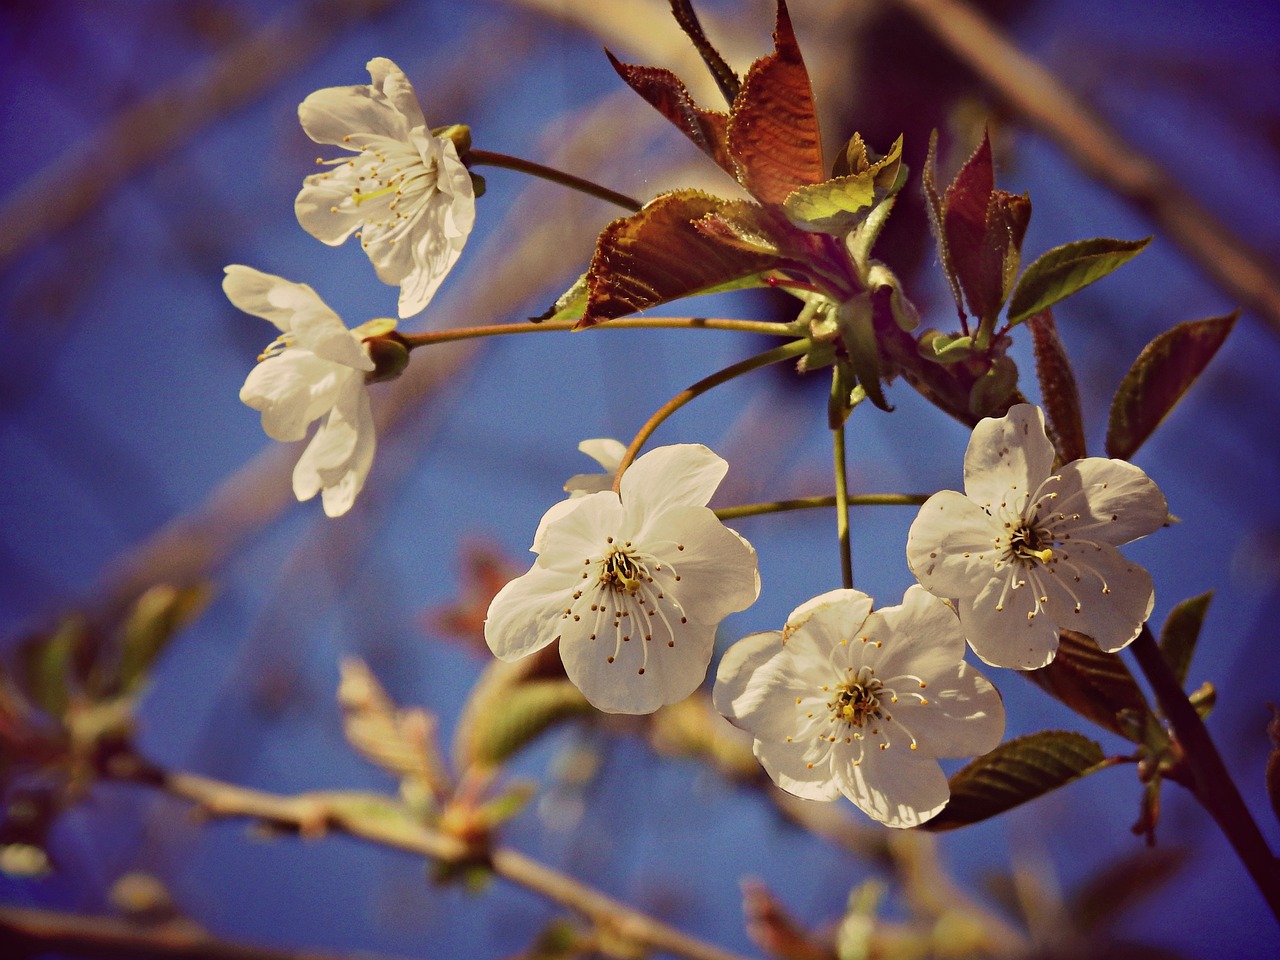 a close up of some white flowers on a tree, a picture, by Pamela Ascherson, romanticism, sakura bloomimg, post processed, amber, cherry